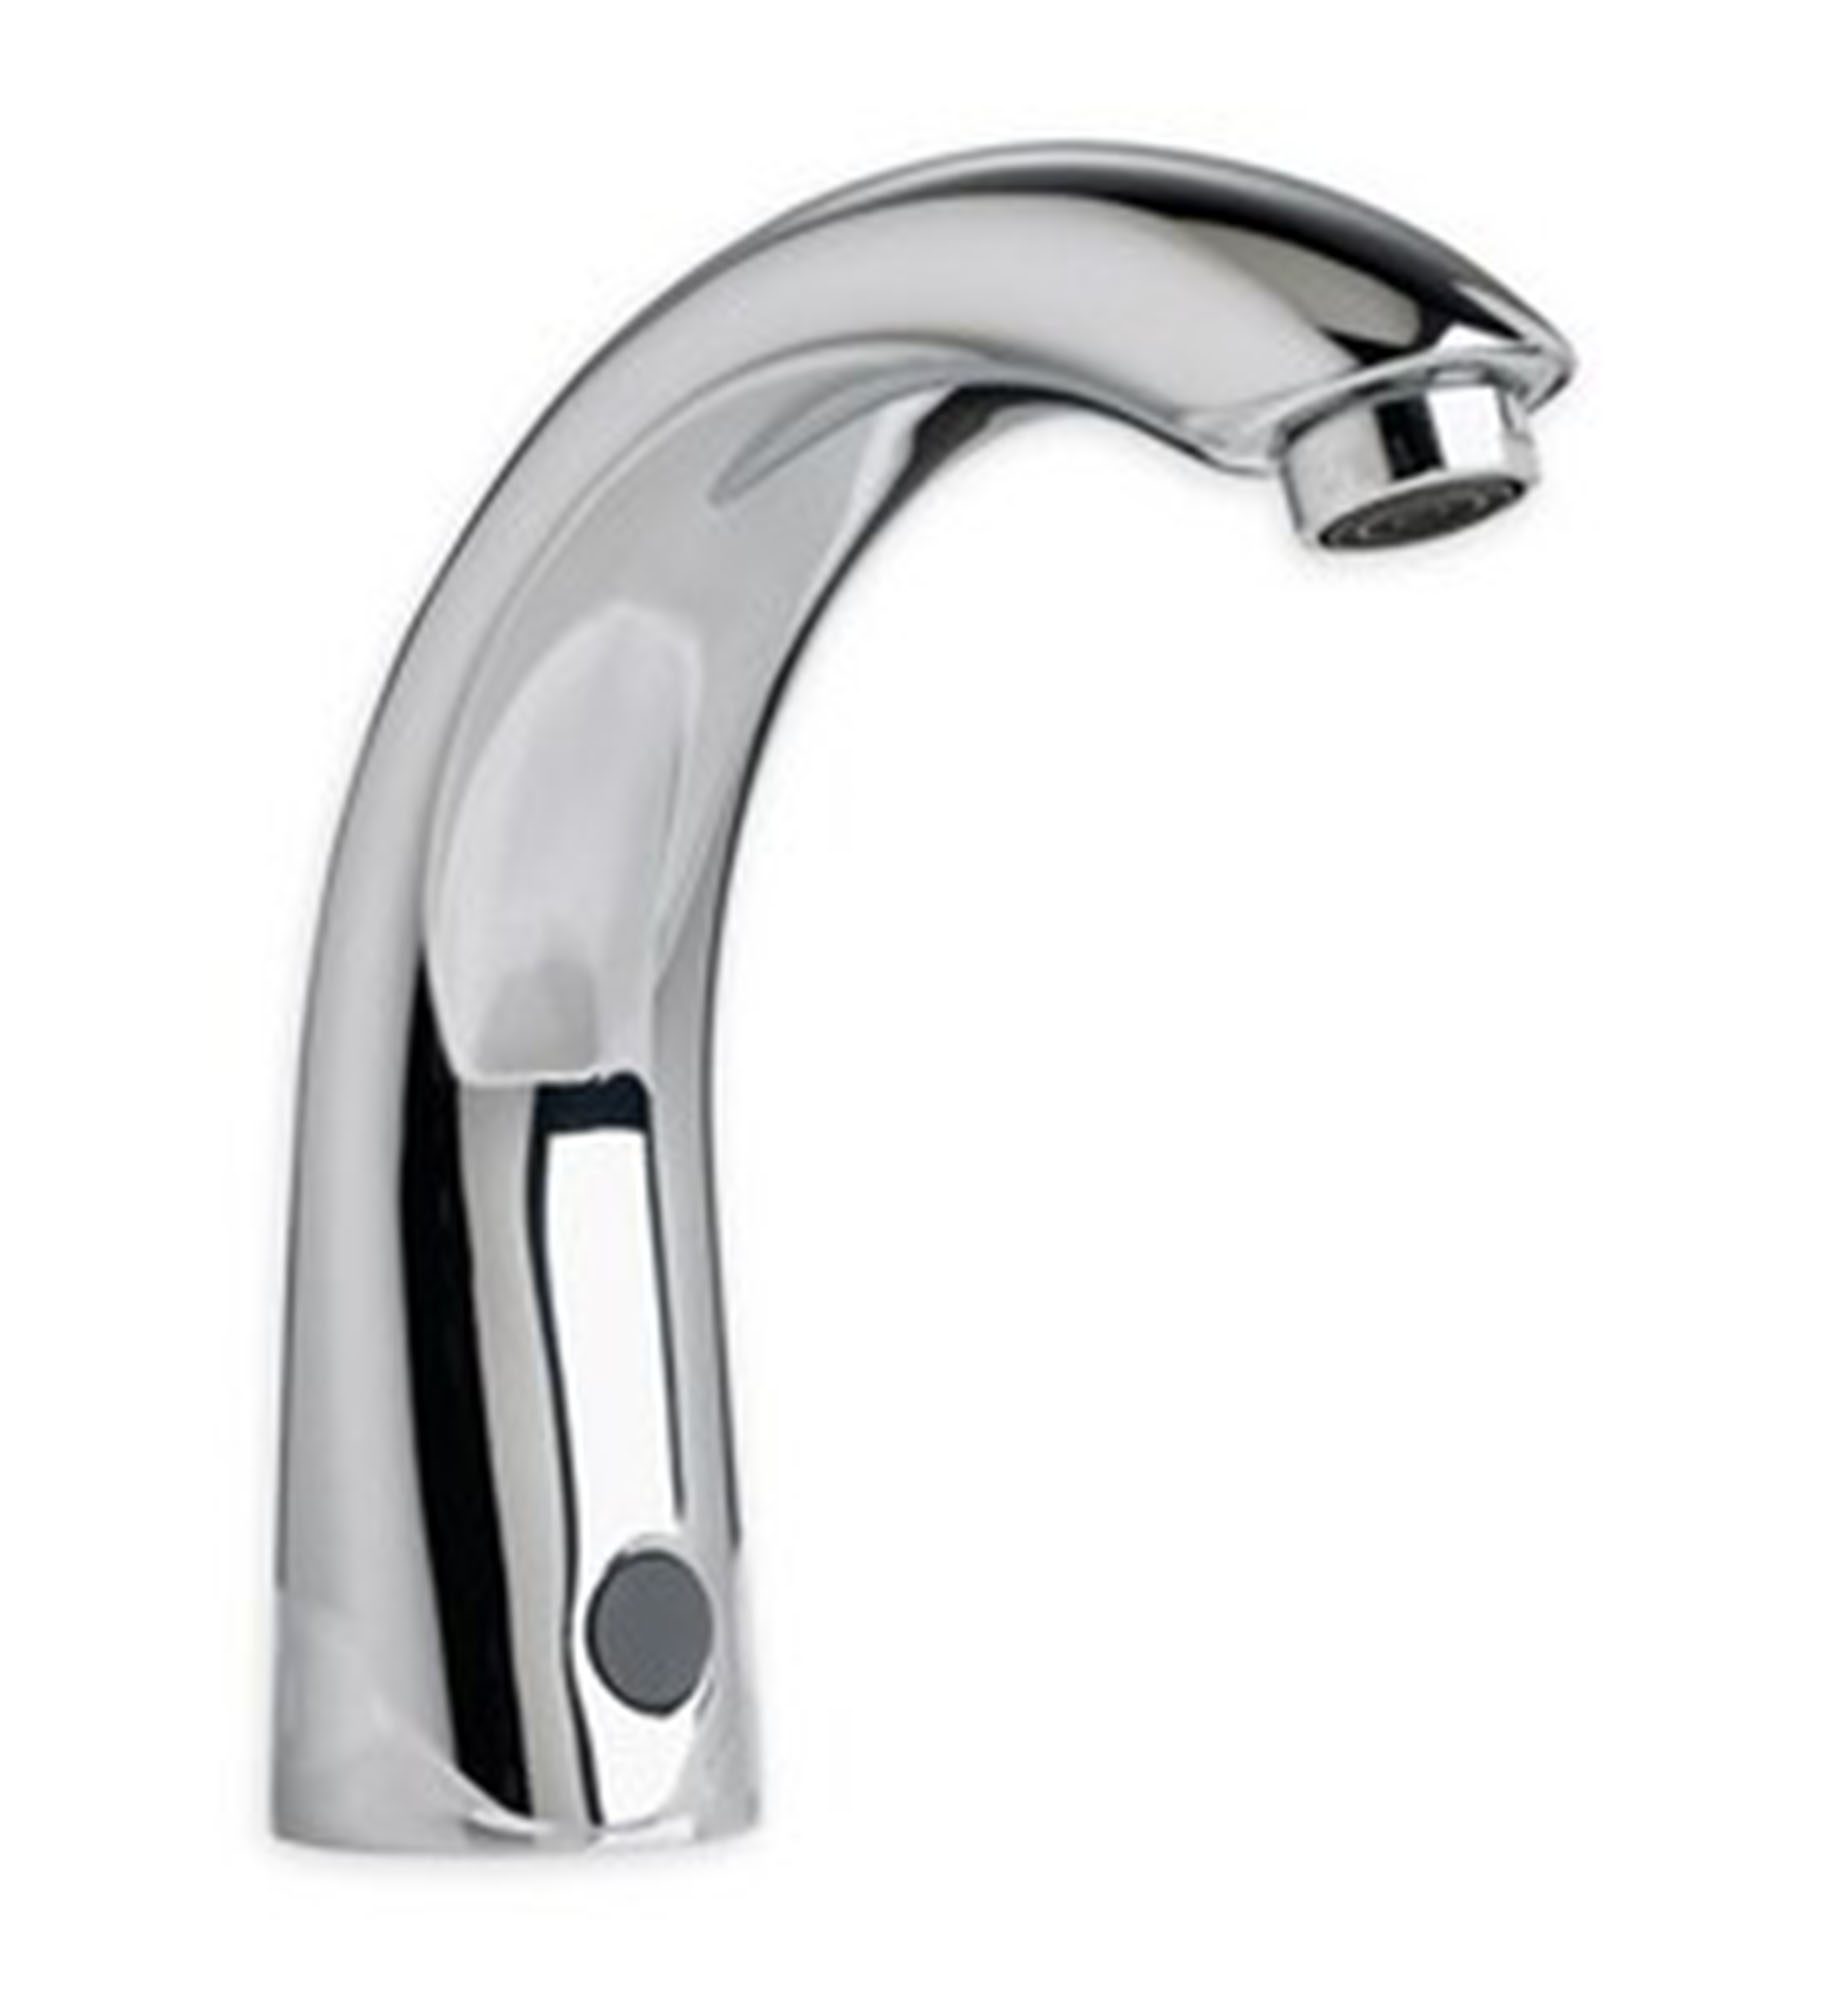 Innsbrook® Selectronic® Touchless Faucet, Battery-Powered, 0.5 gpm/1.9 Lpm